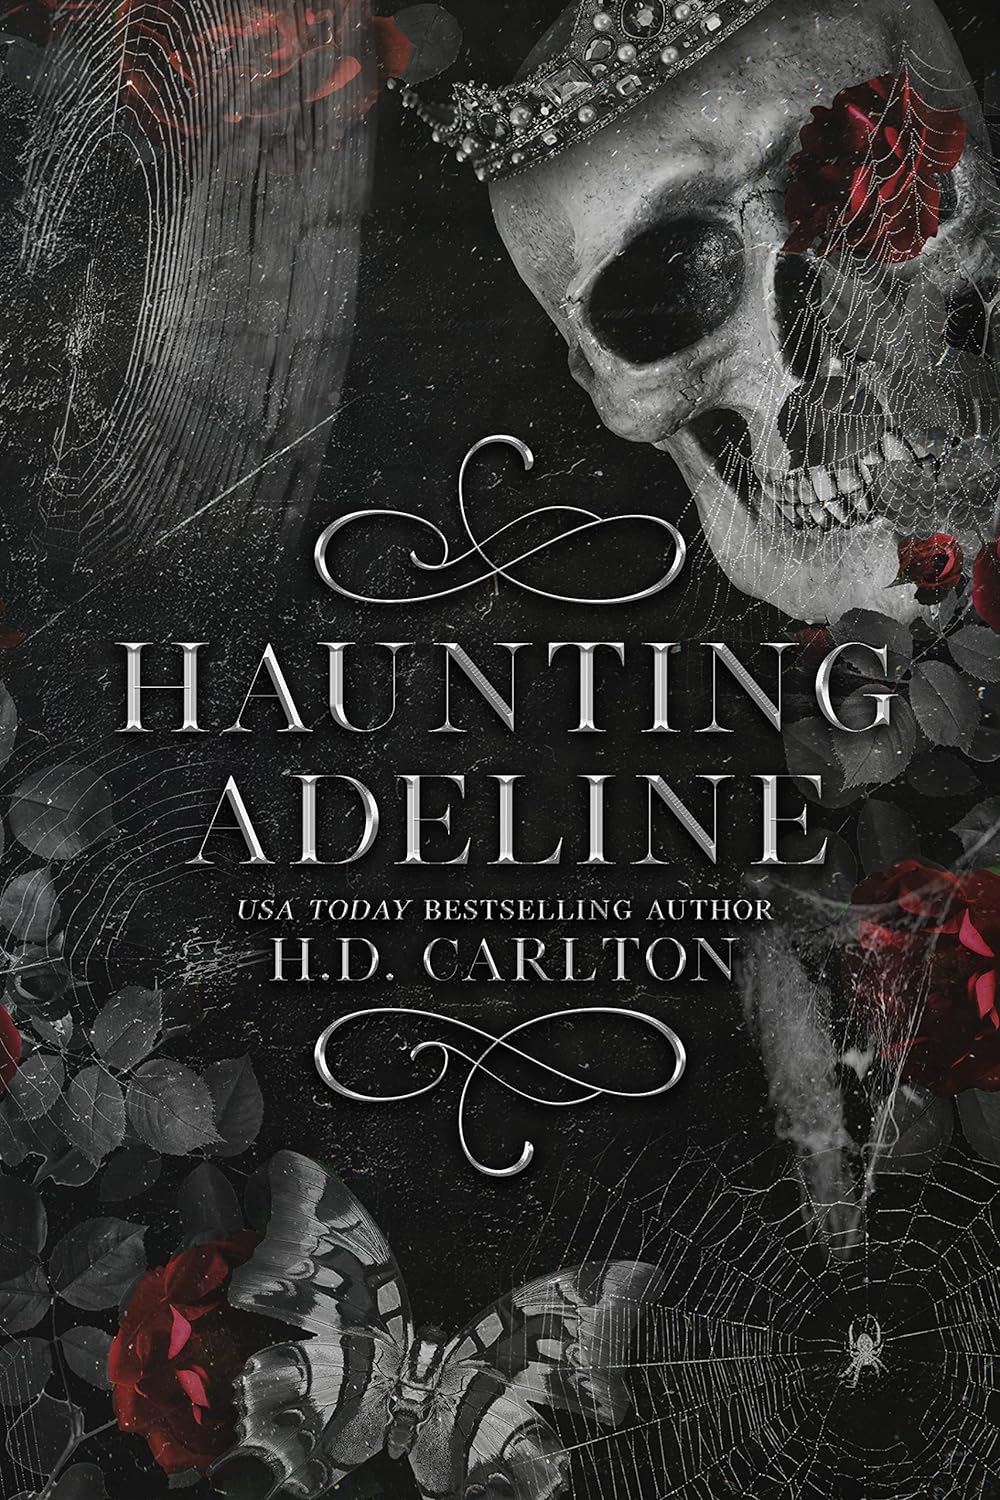 Haunting Adeline (Cat and Mouse Duet Book 1)…